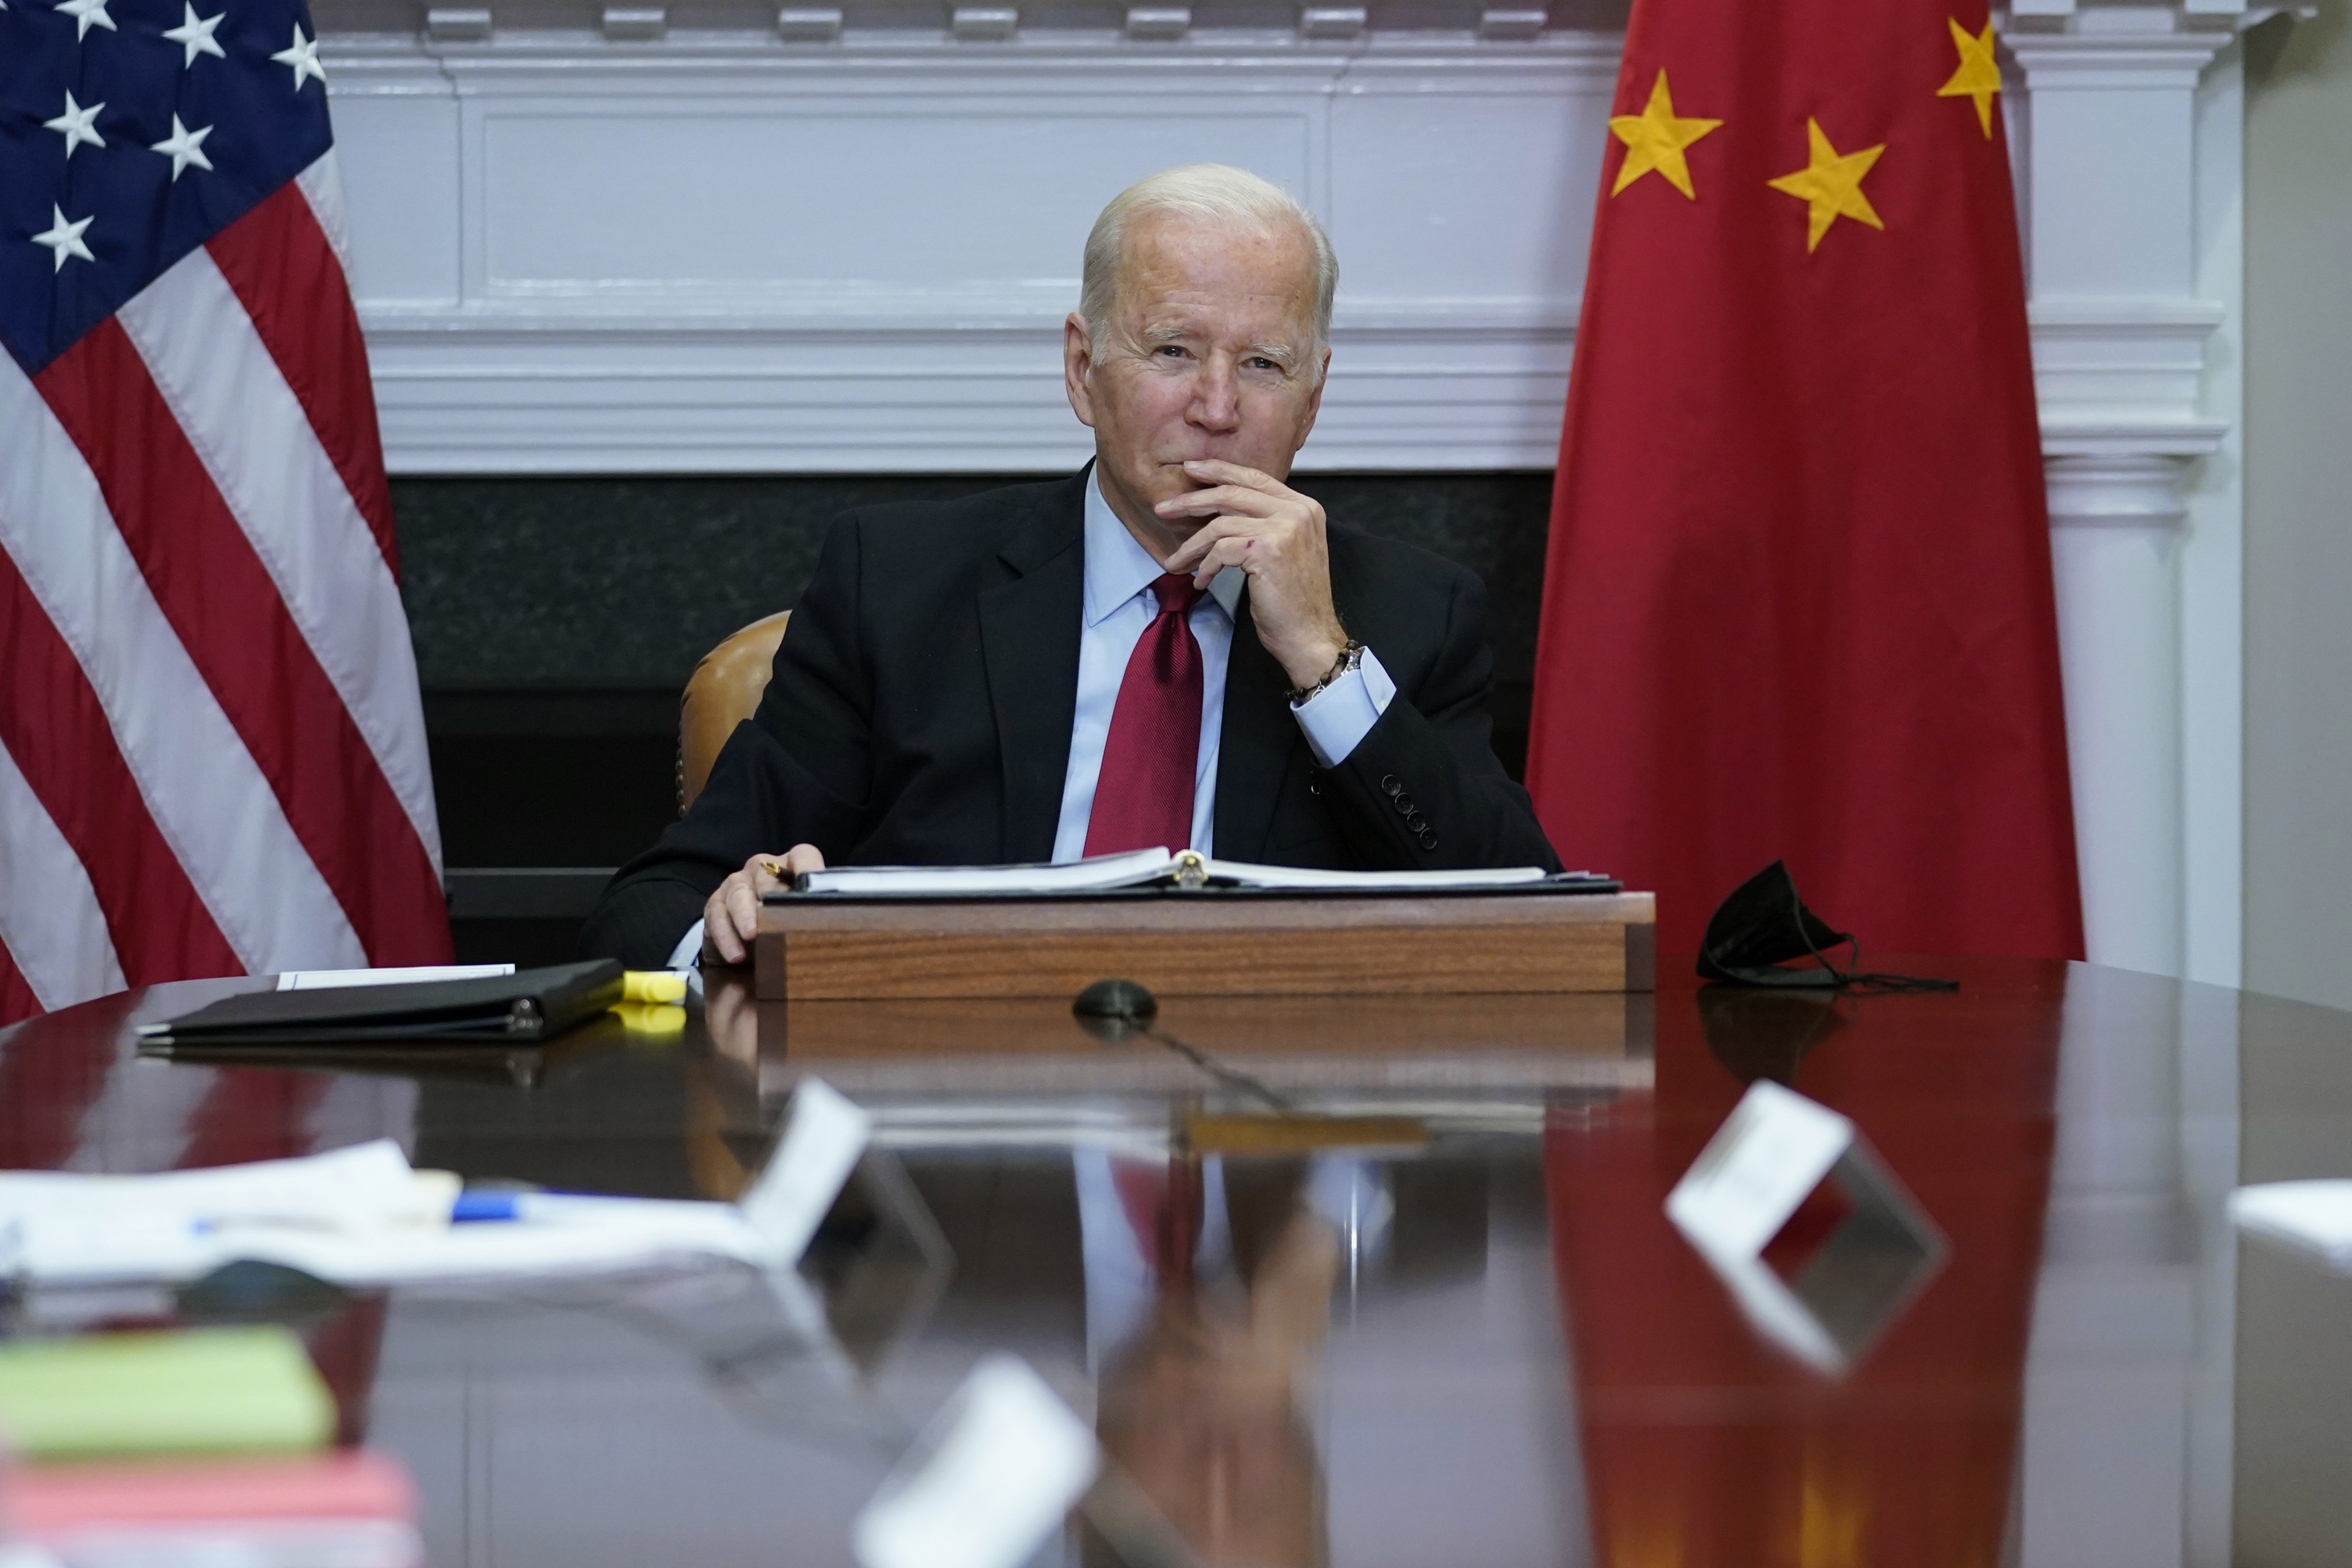 President Joe Biden listens during a virtual meeting with Chinese President Xi Jinping, at the White House on November 15, 2021. They last met in person last November, on the sidelines of the G20 summit in Bali, Indonesia. Photo: AP